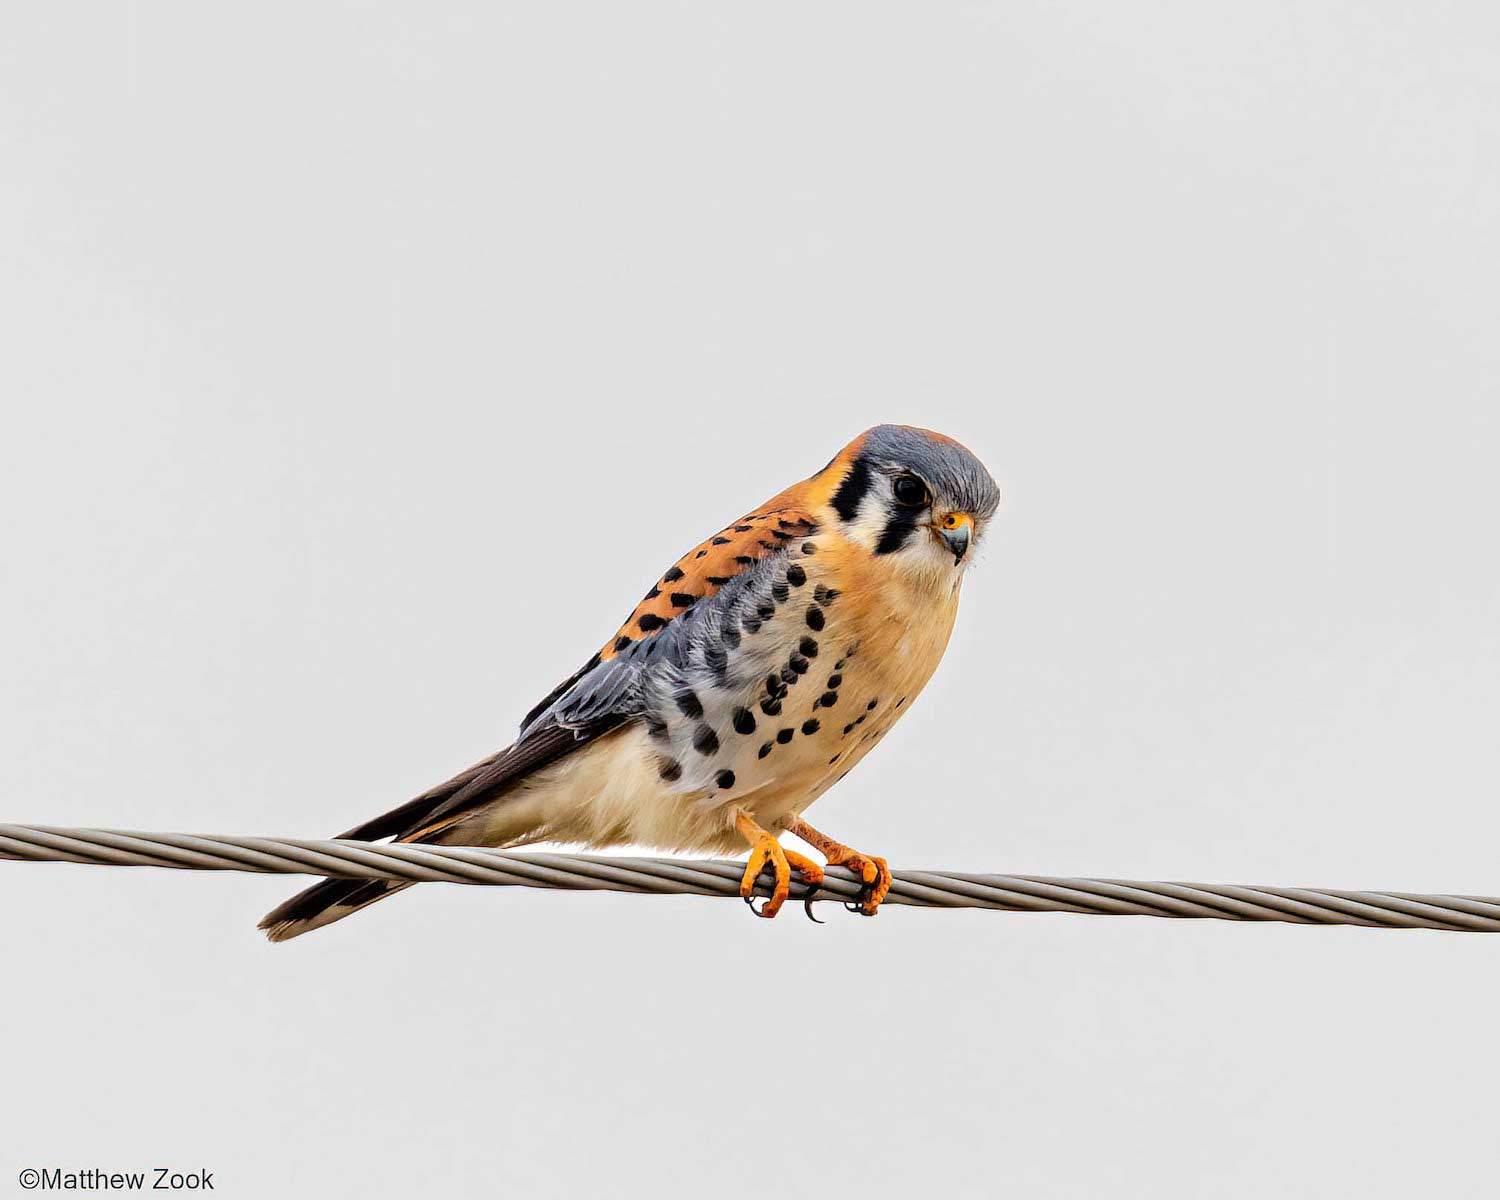 An American kestrel perched on a wire.